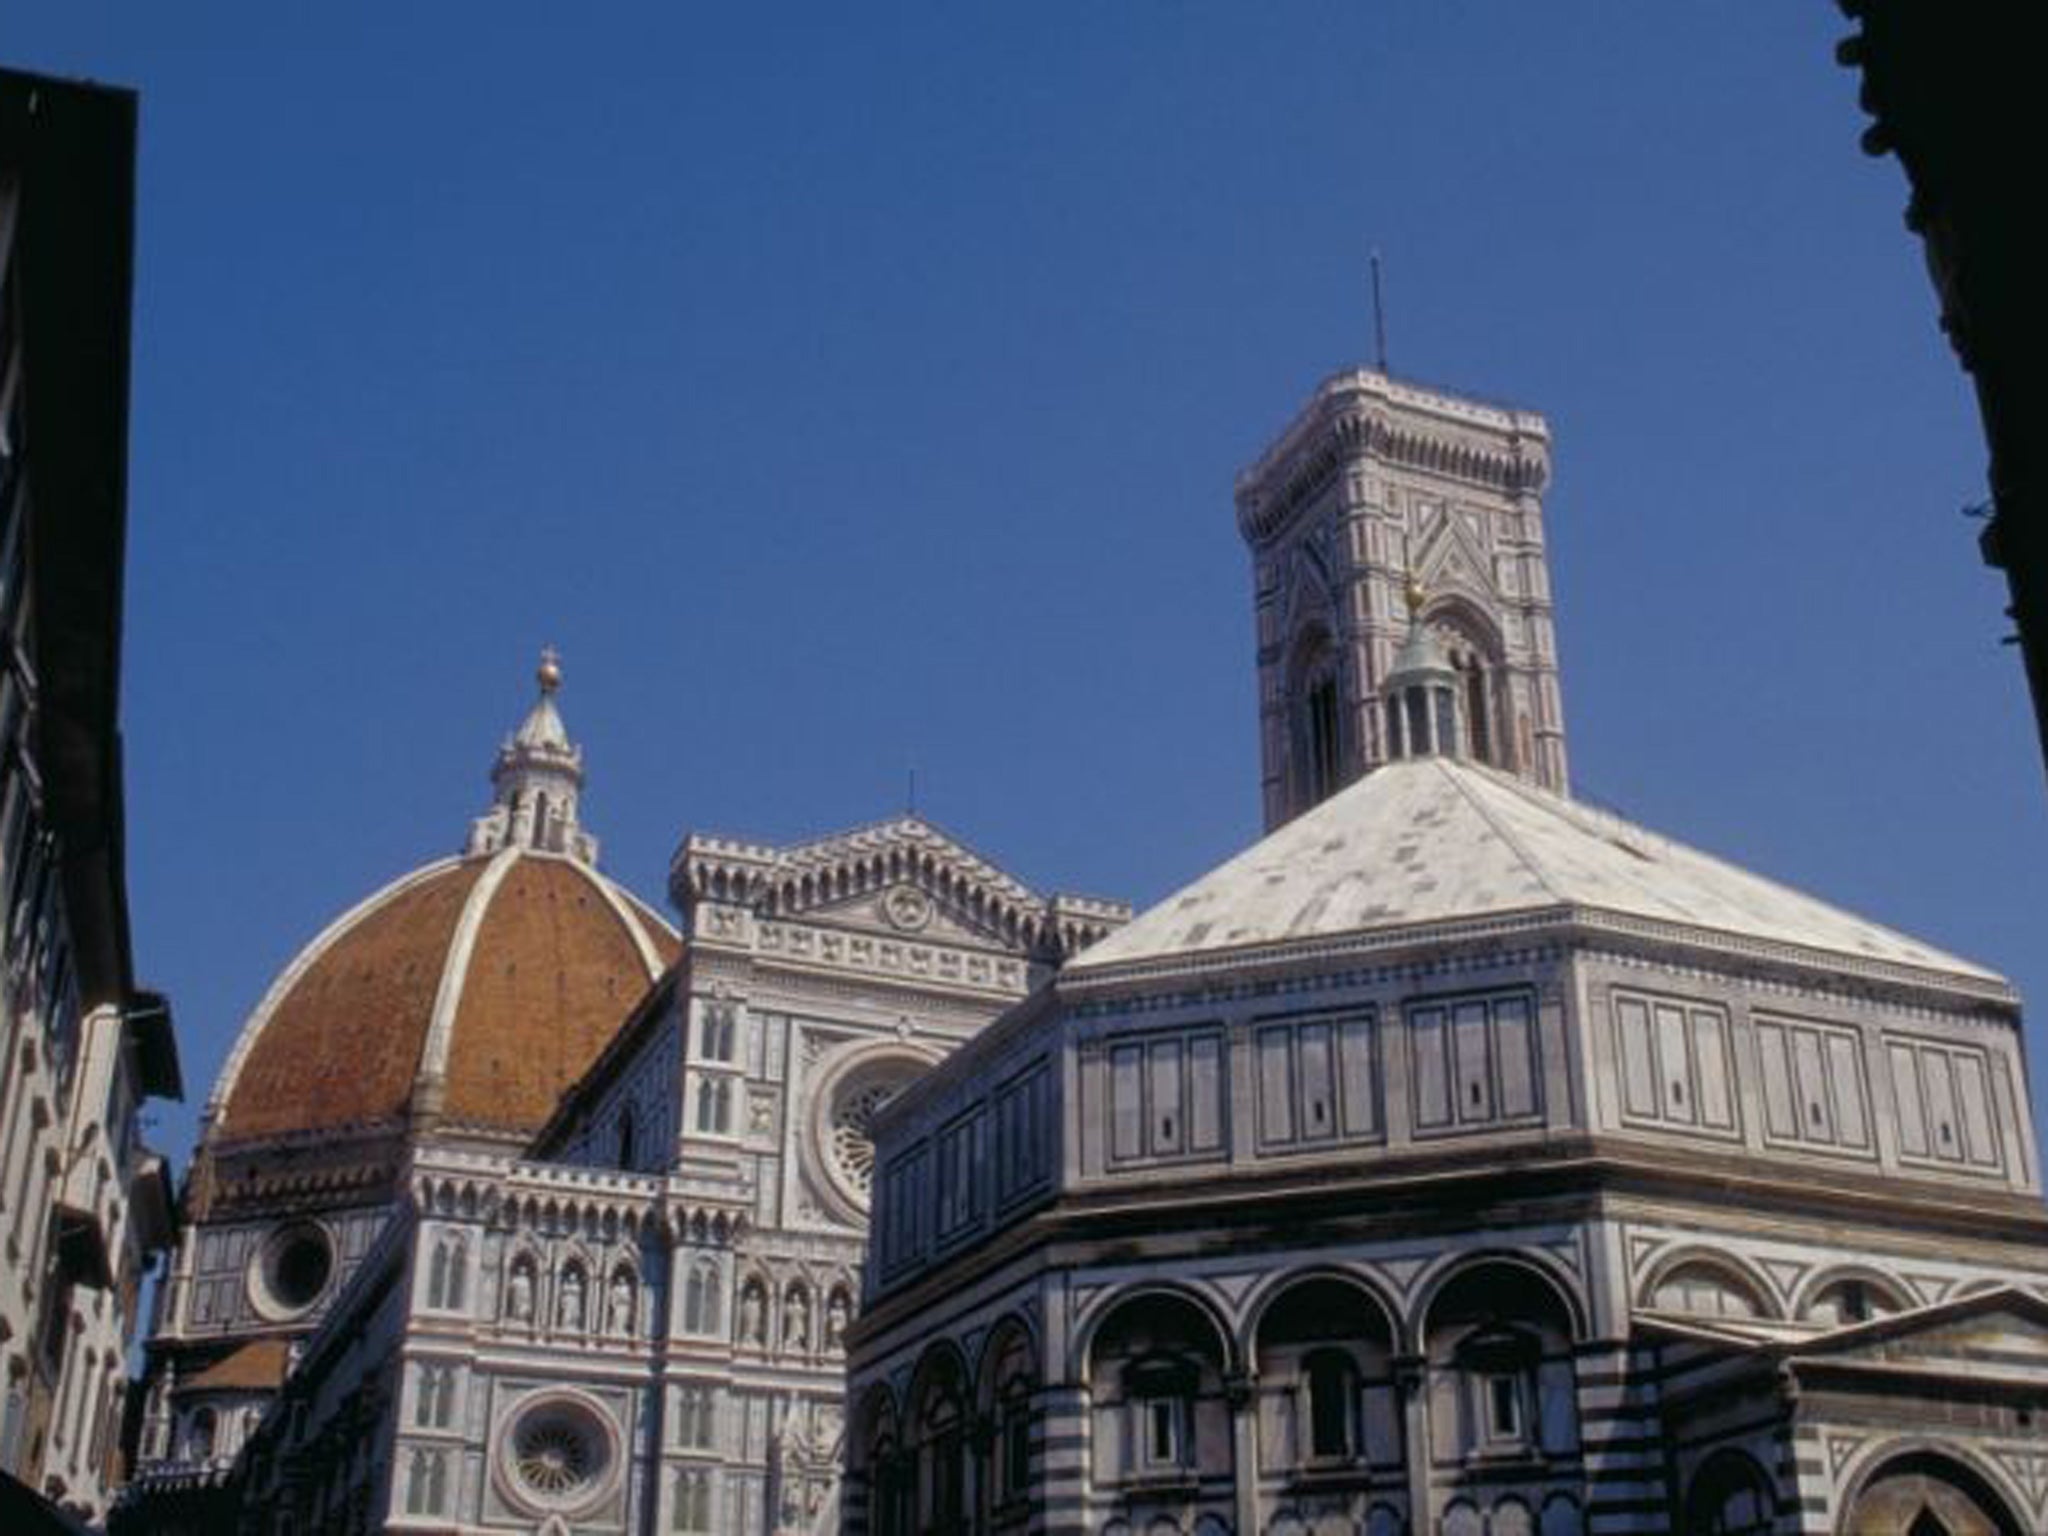 Florence: the dazzling Duomo